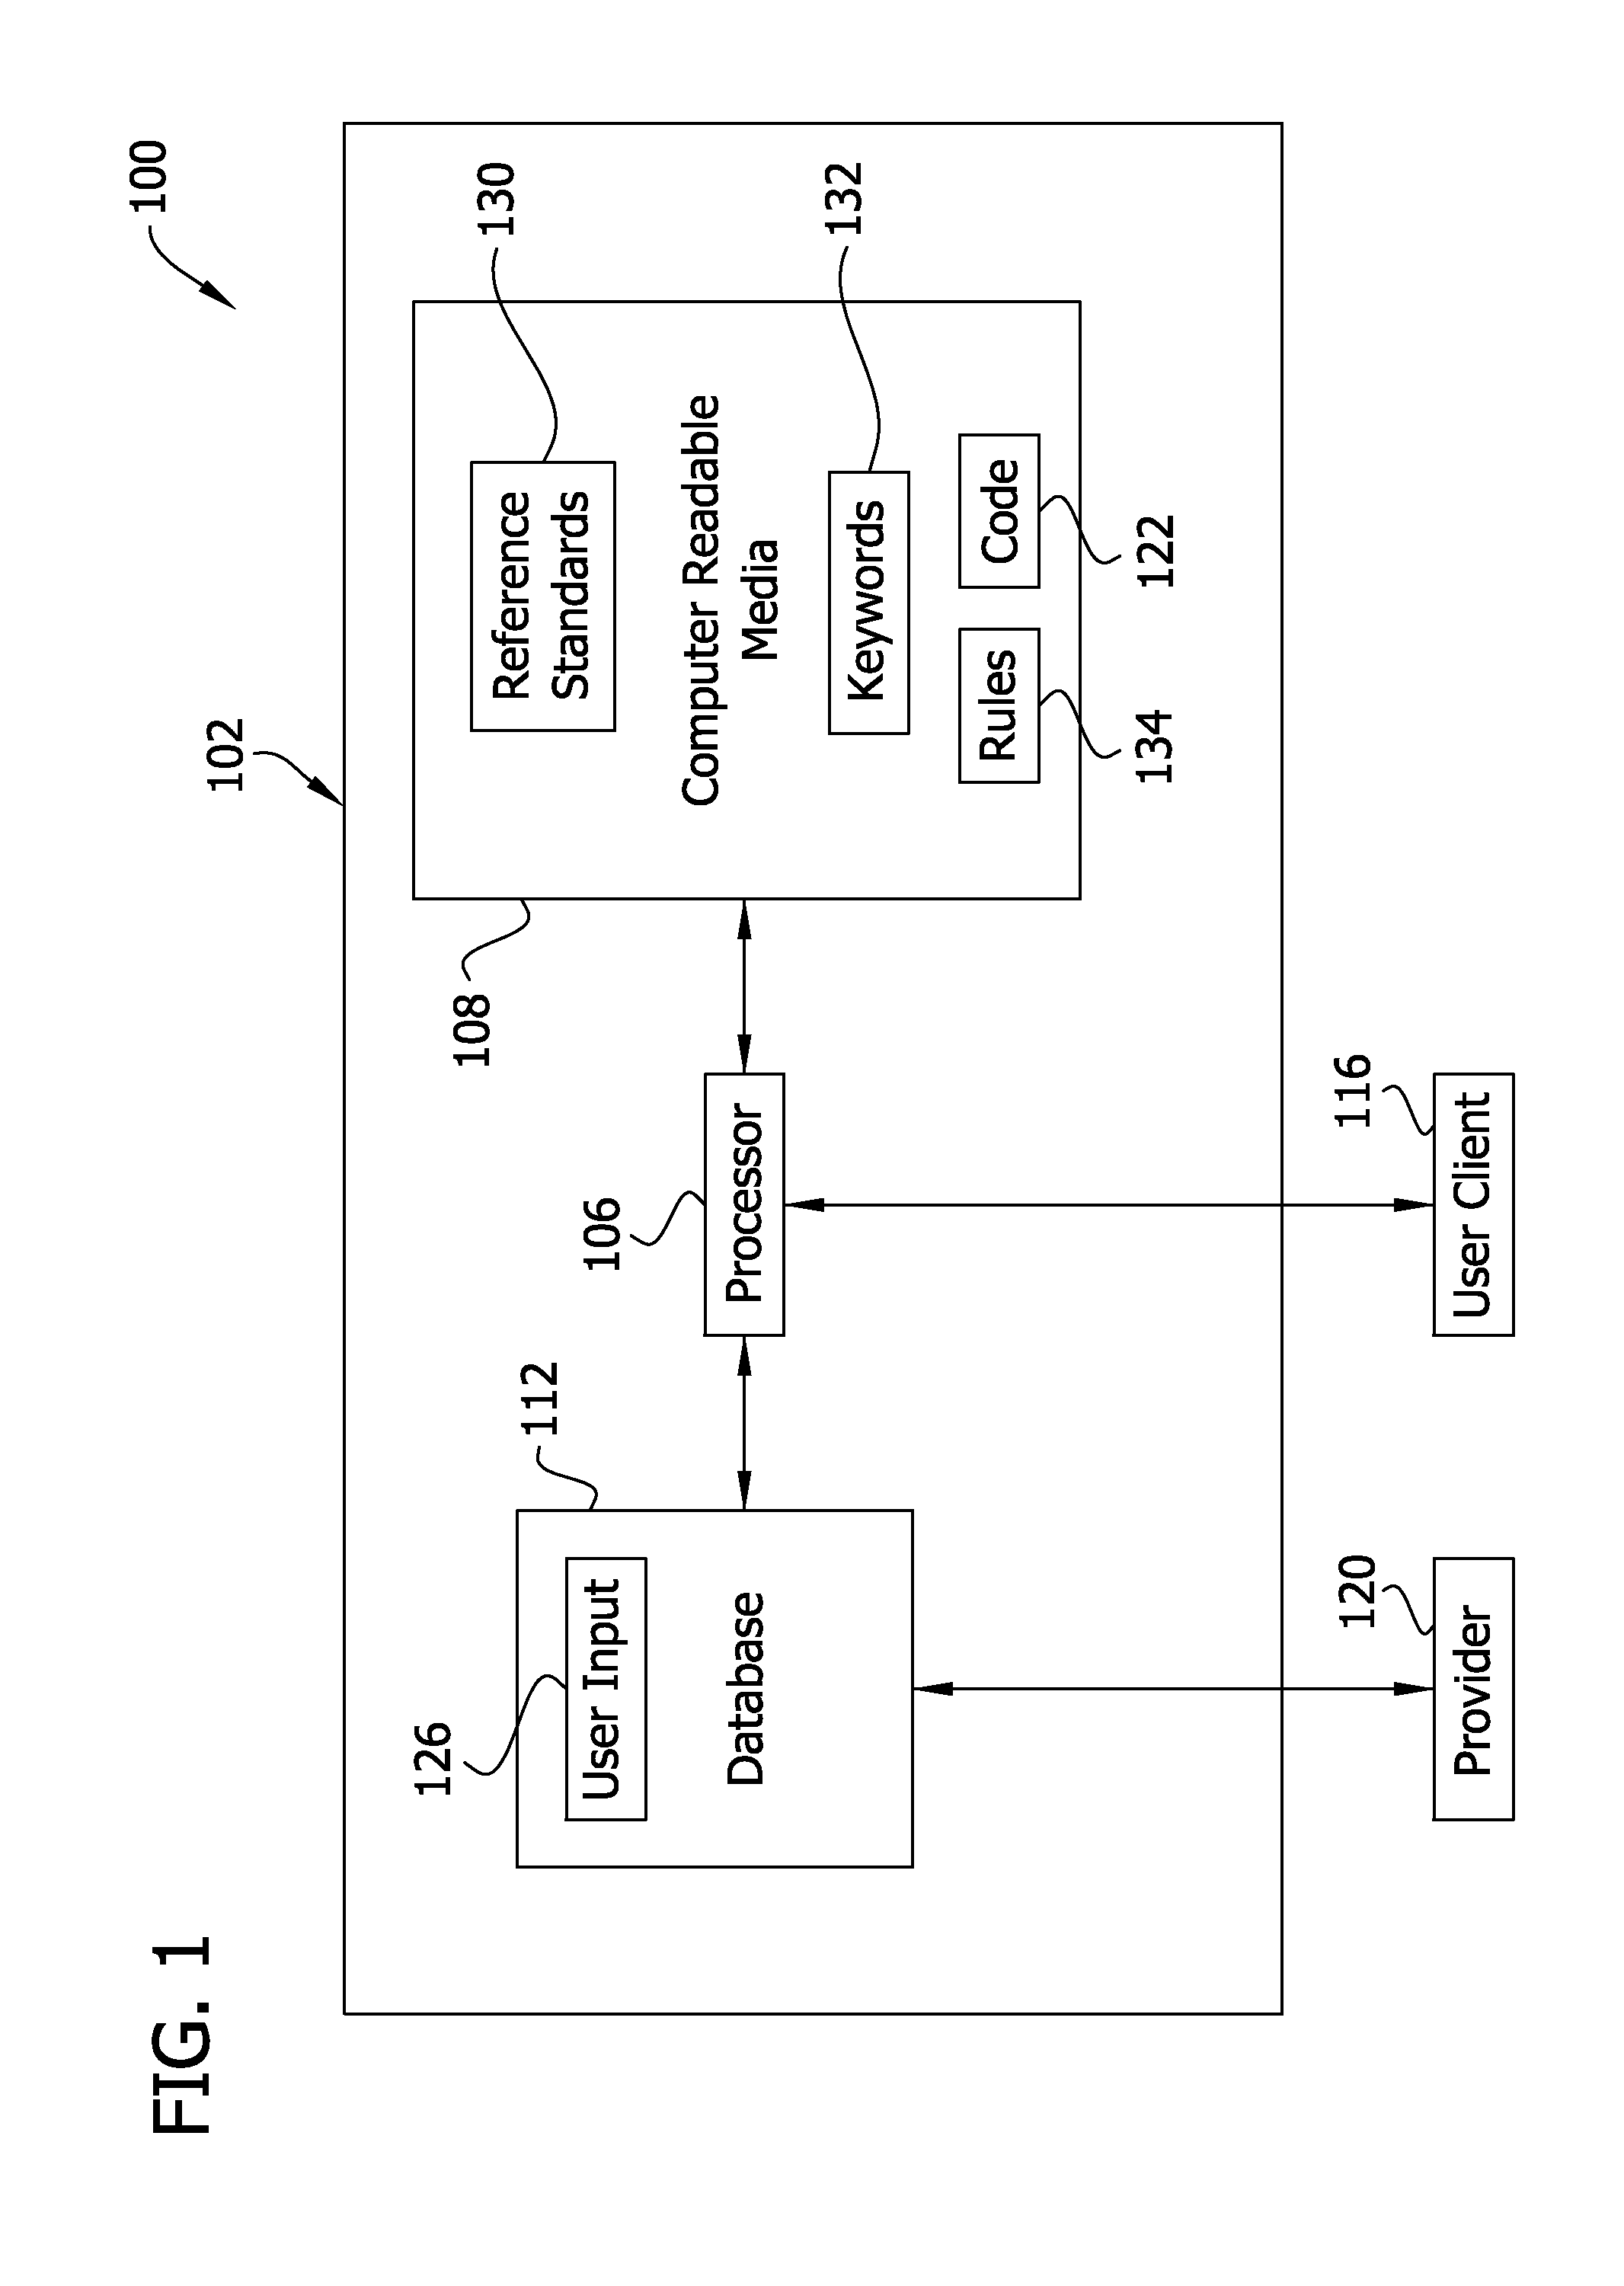 System and method for populating a database with user input